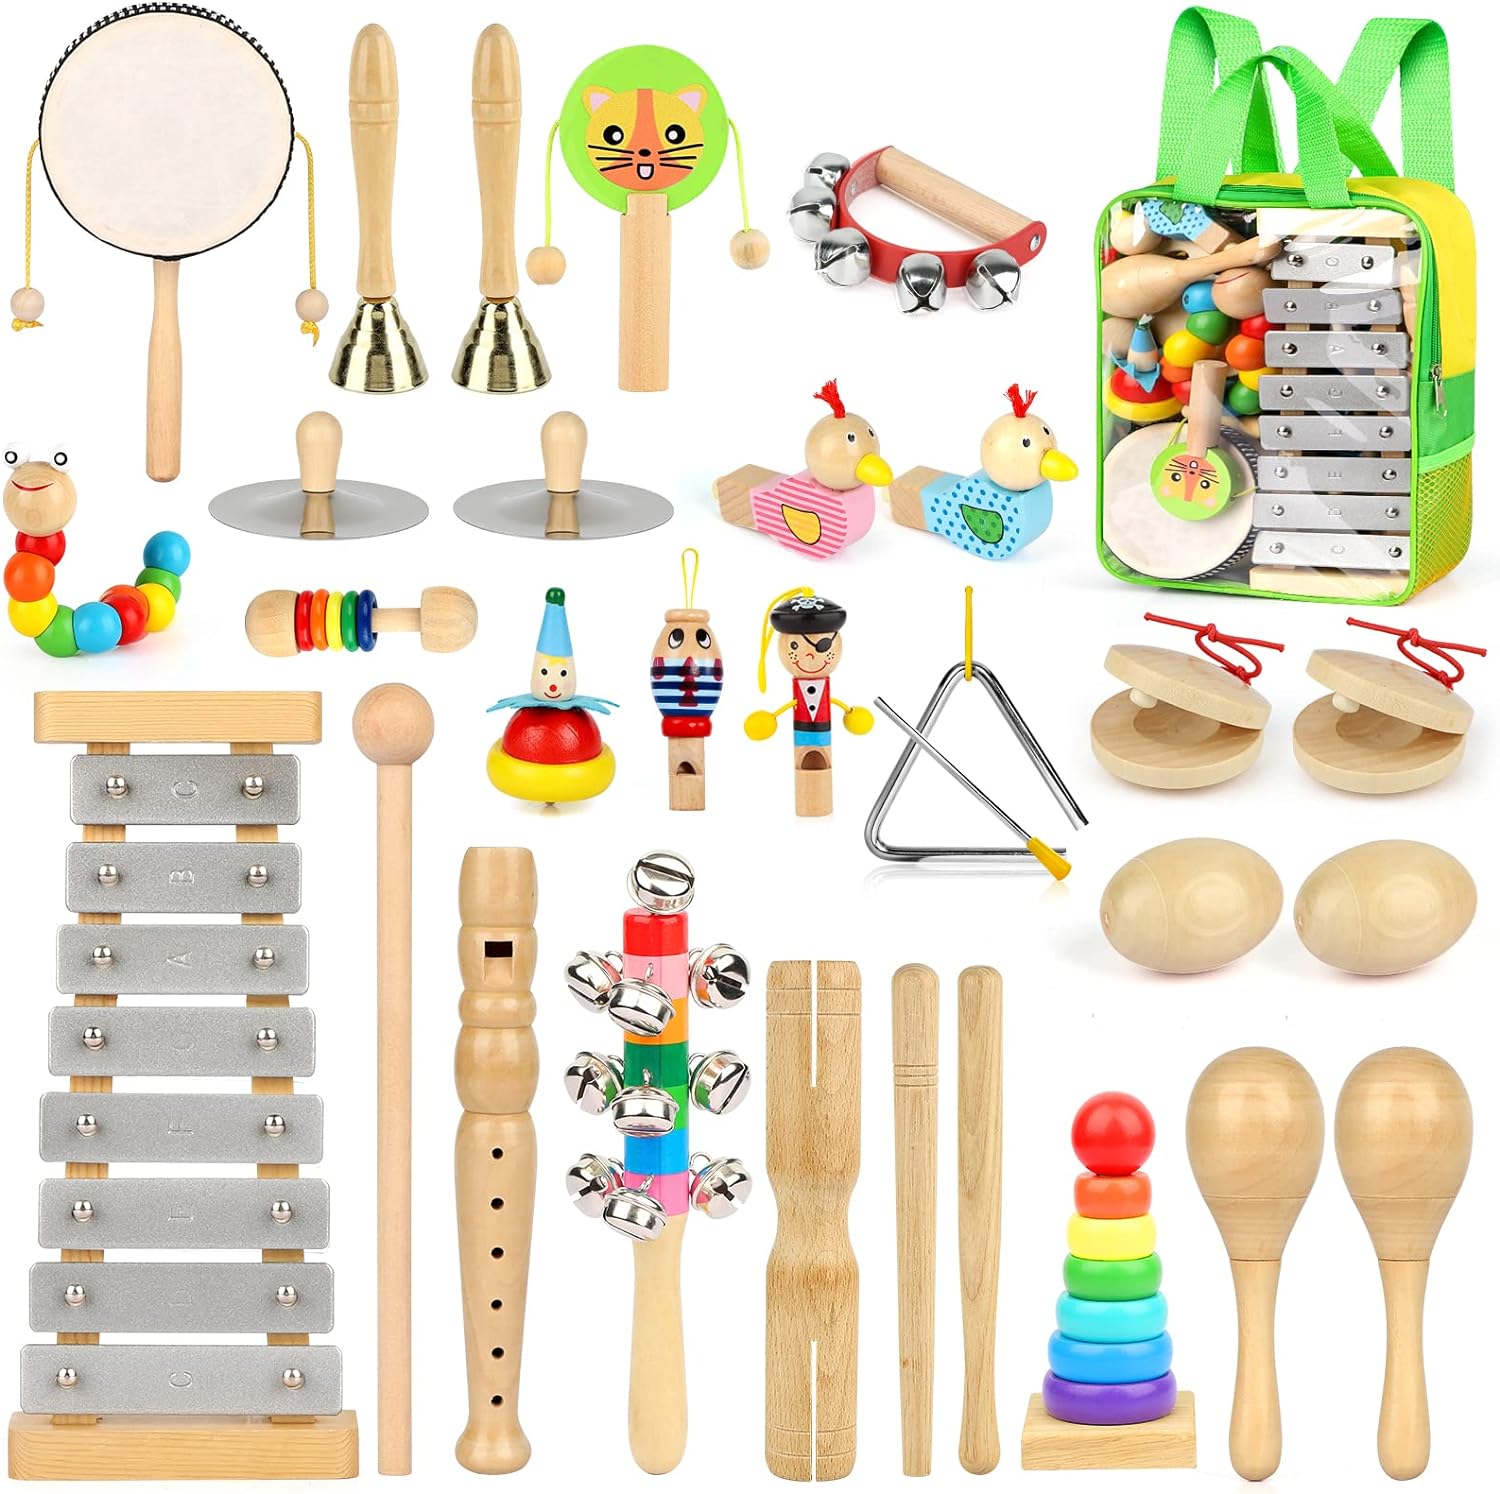 KAQINU Kids Musical Instruments Toys Review